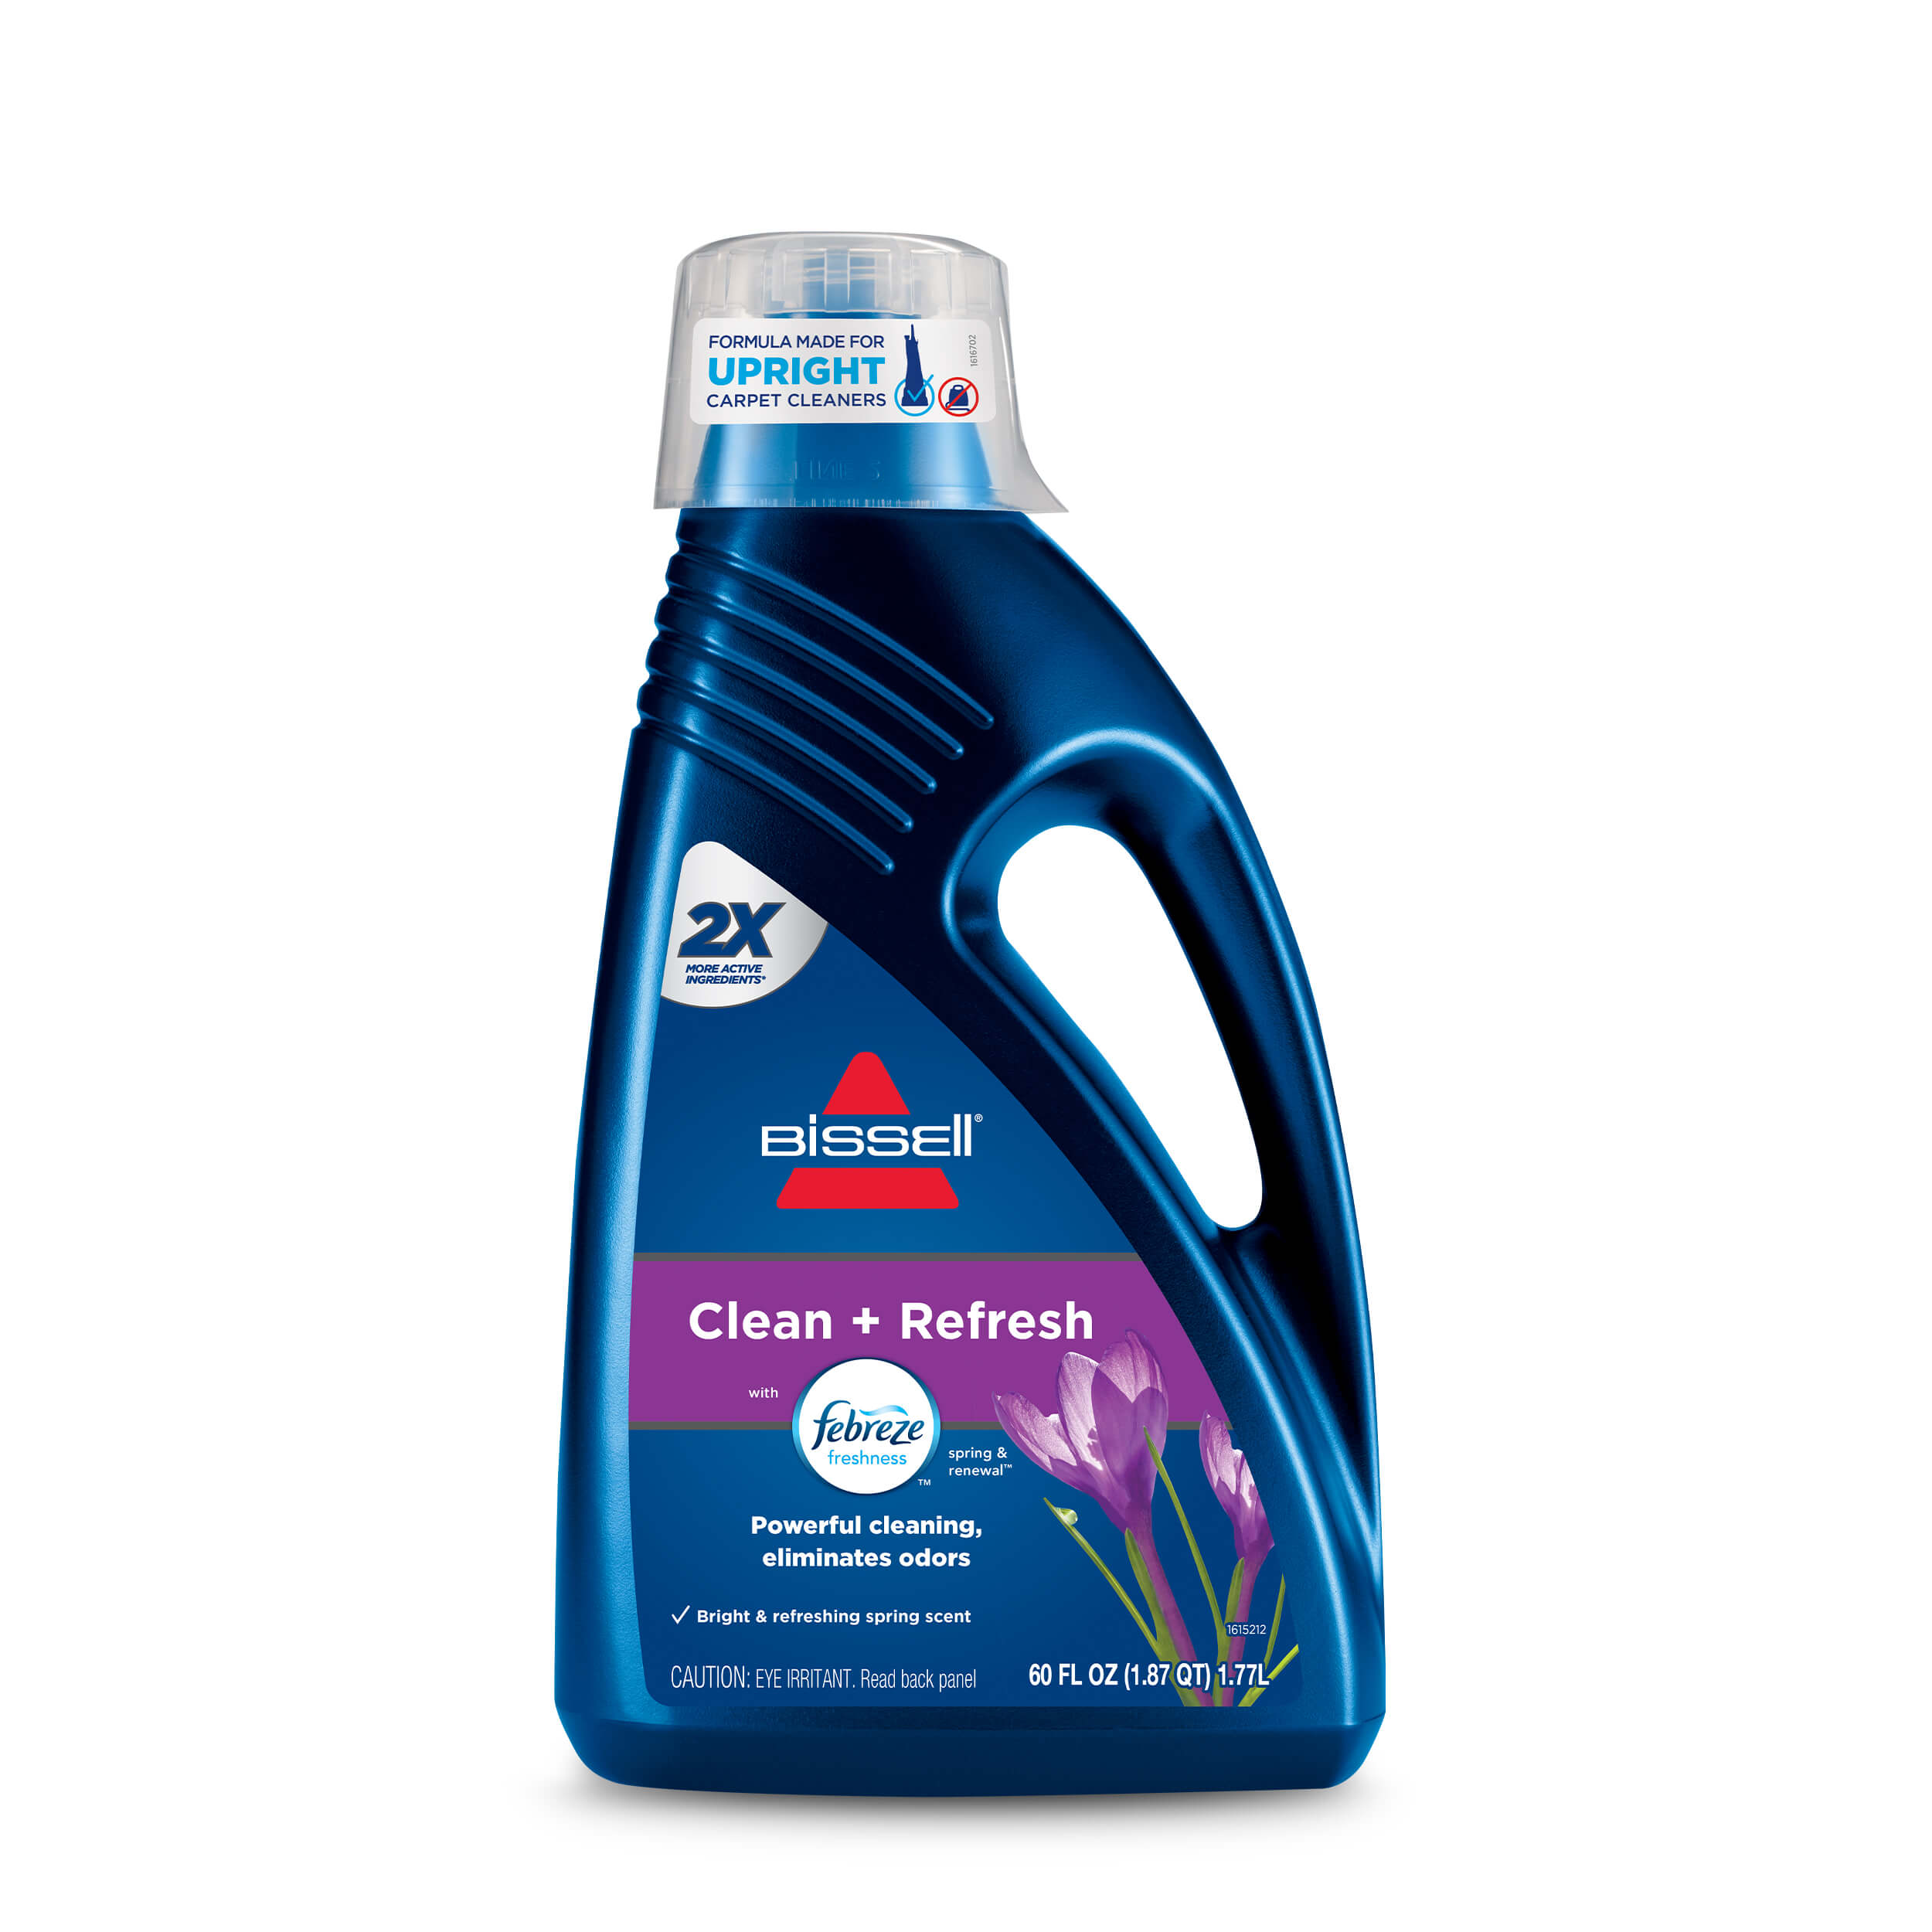 BISSELL WASH DEEP Clean Concentrated Carpet Shampoo Cleaner